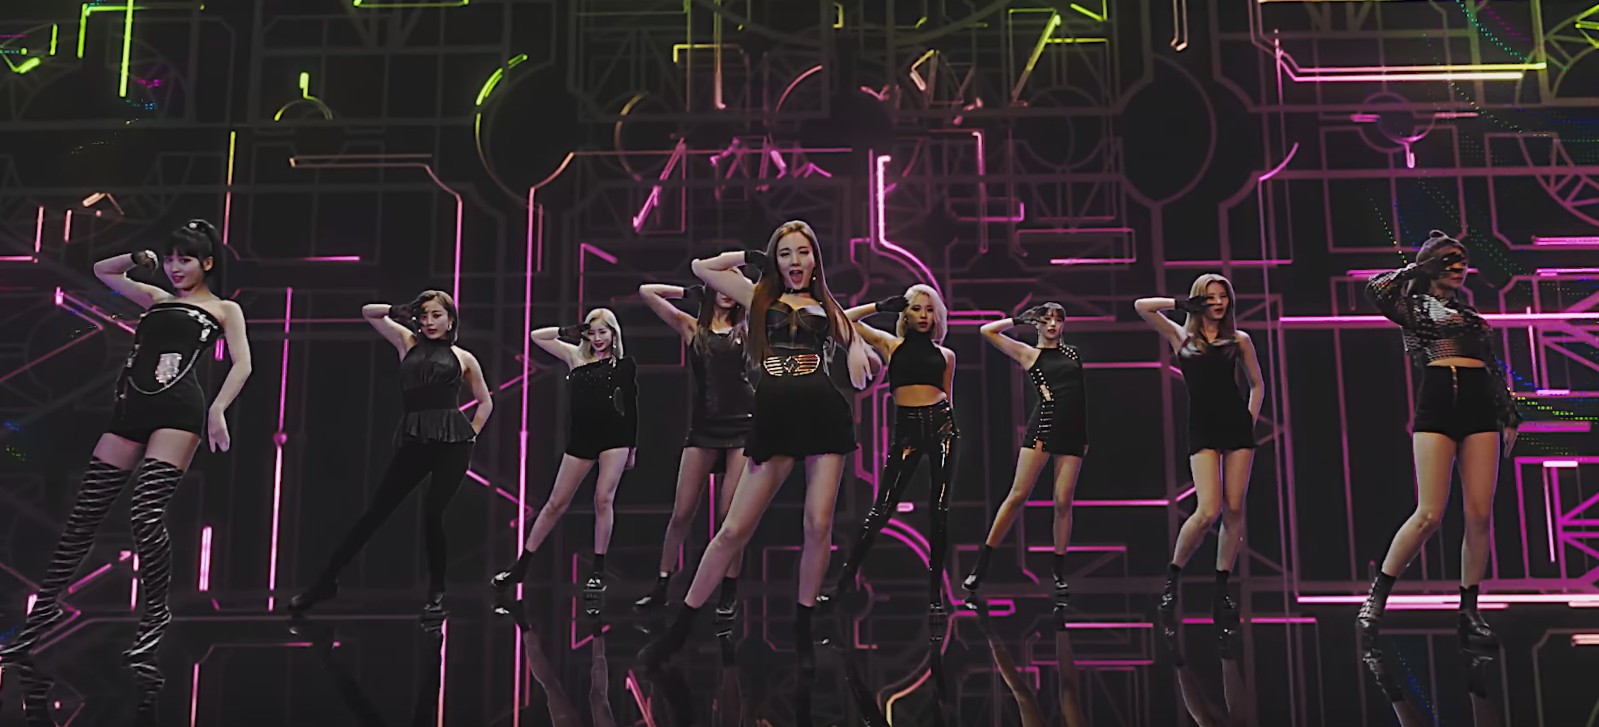 Twice Experiments With A More Mature Concept With Fancy Synnistry